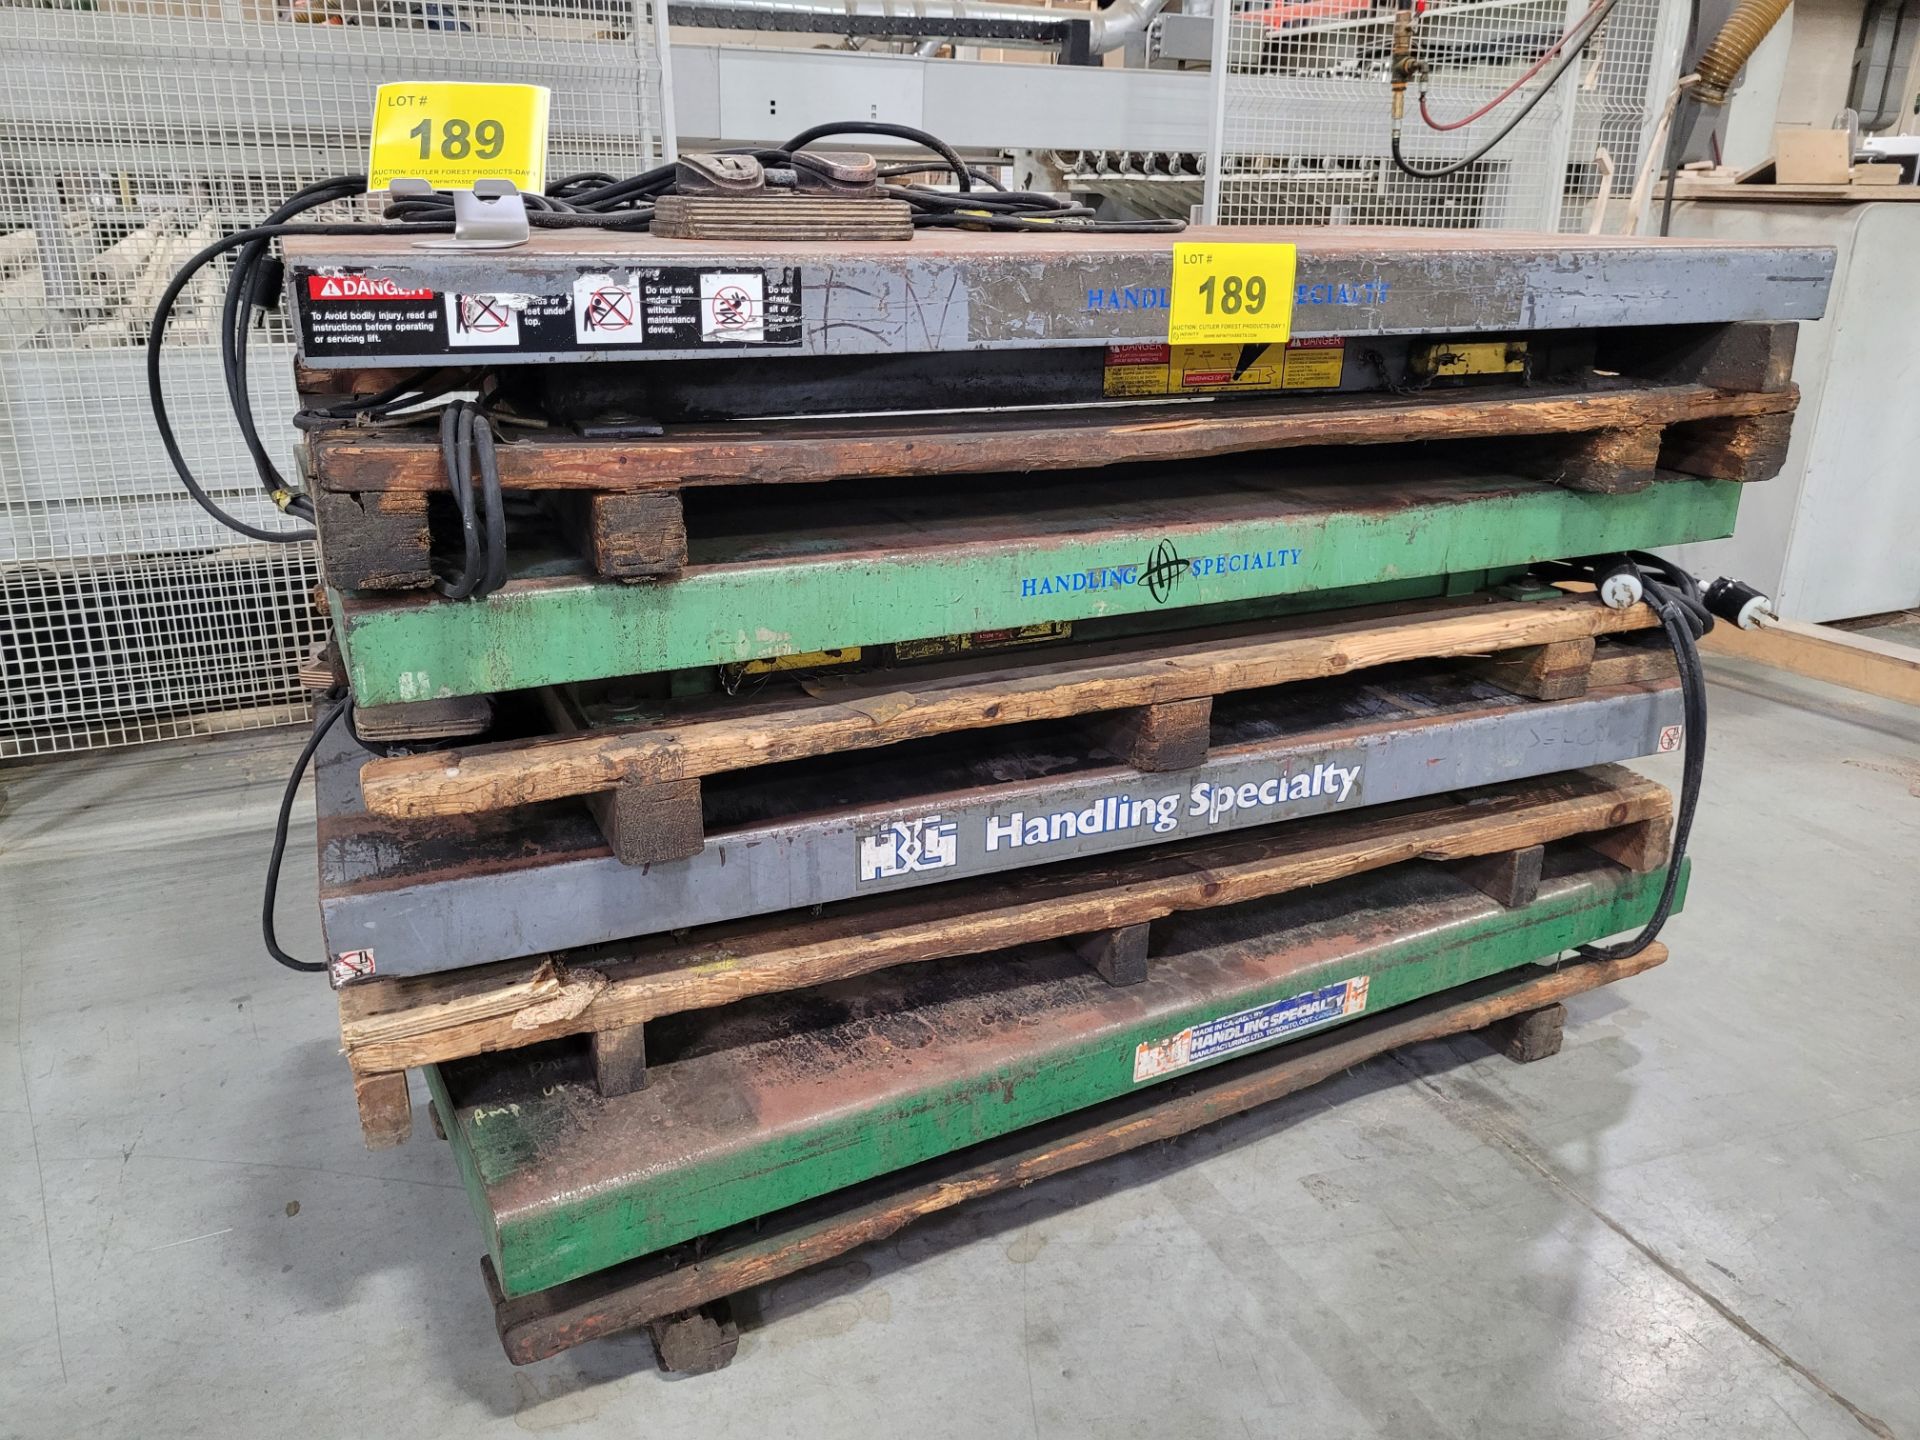 LOT OF (4) HANDLING SPECIALTY SCISSOR LIFT TABLES (CONDITION UNKNOWN)